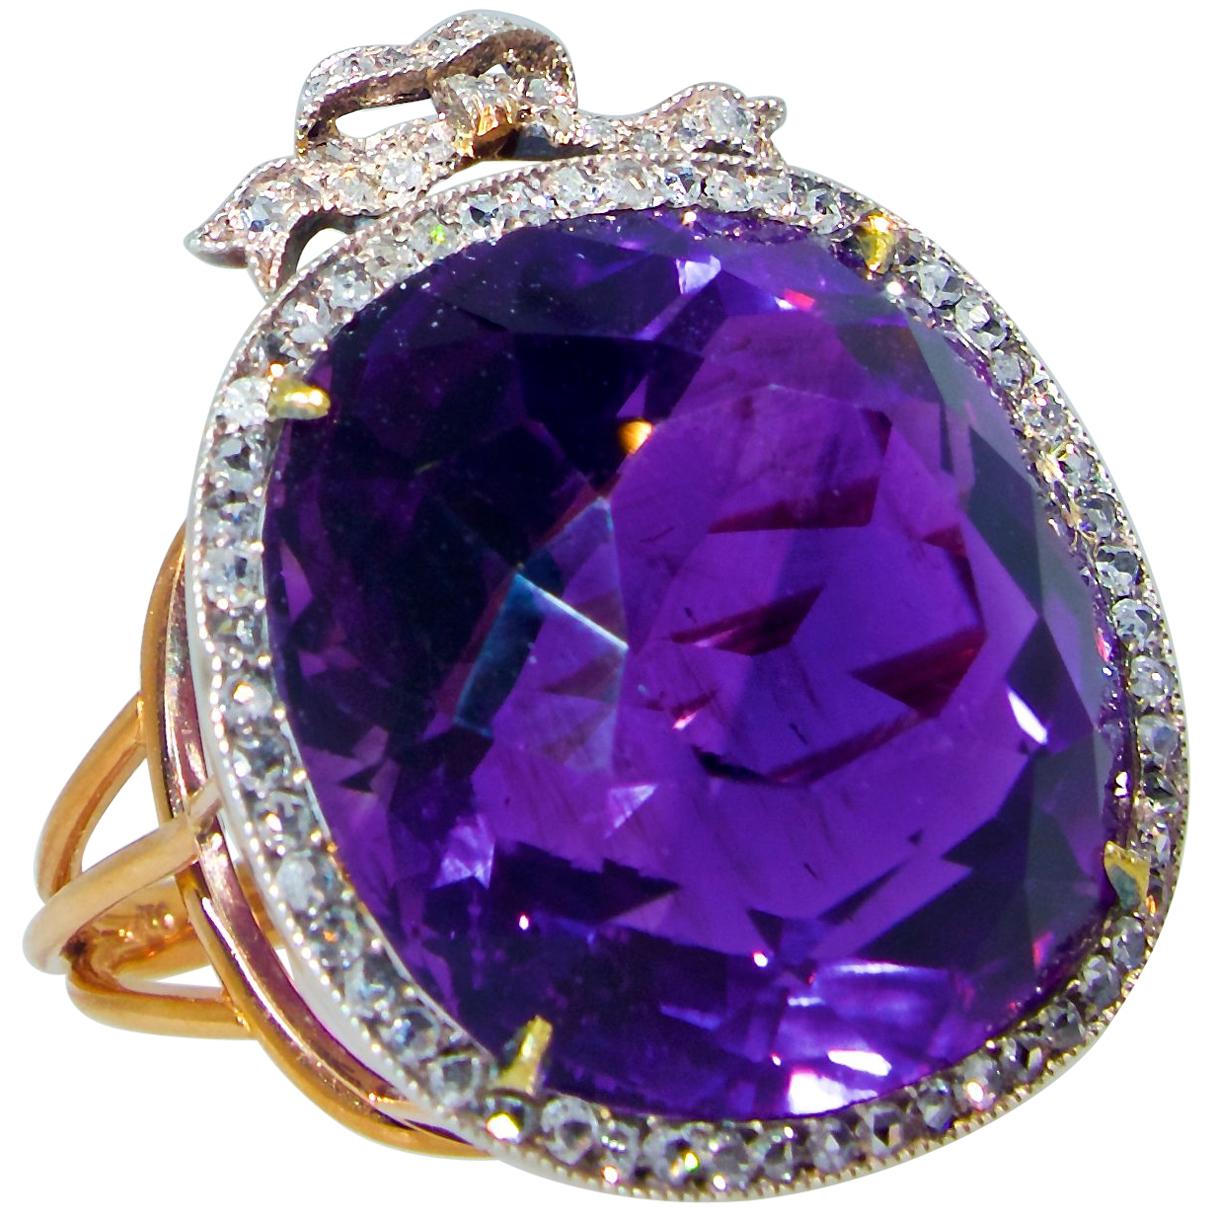 Antique ring in silver and gold possessing a very fine natural Siberian amethyst displaying  a pure royal purple color with a hint of red - the classic Siberian color seen in 19th century jewelry.  This center stone weighs approximately 28.5 cts and